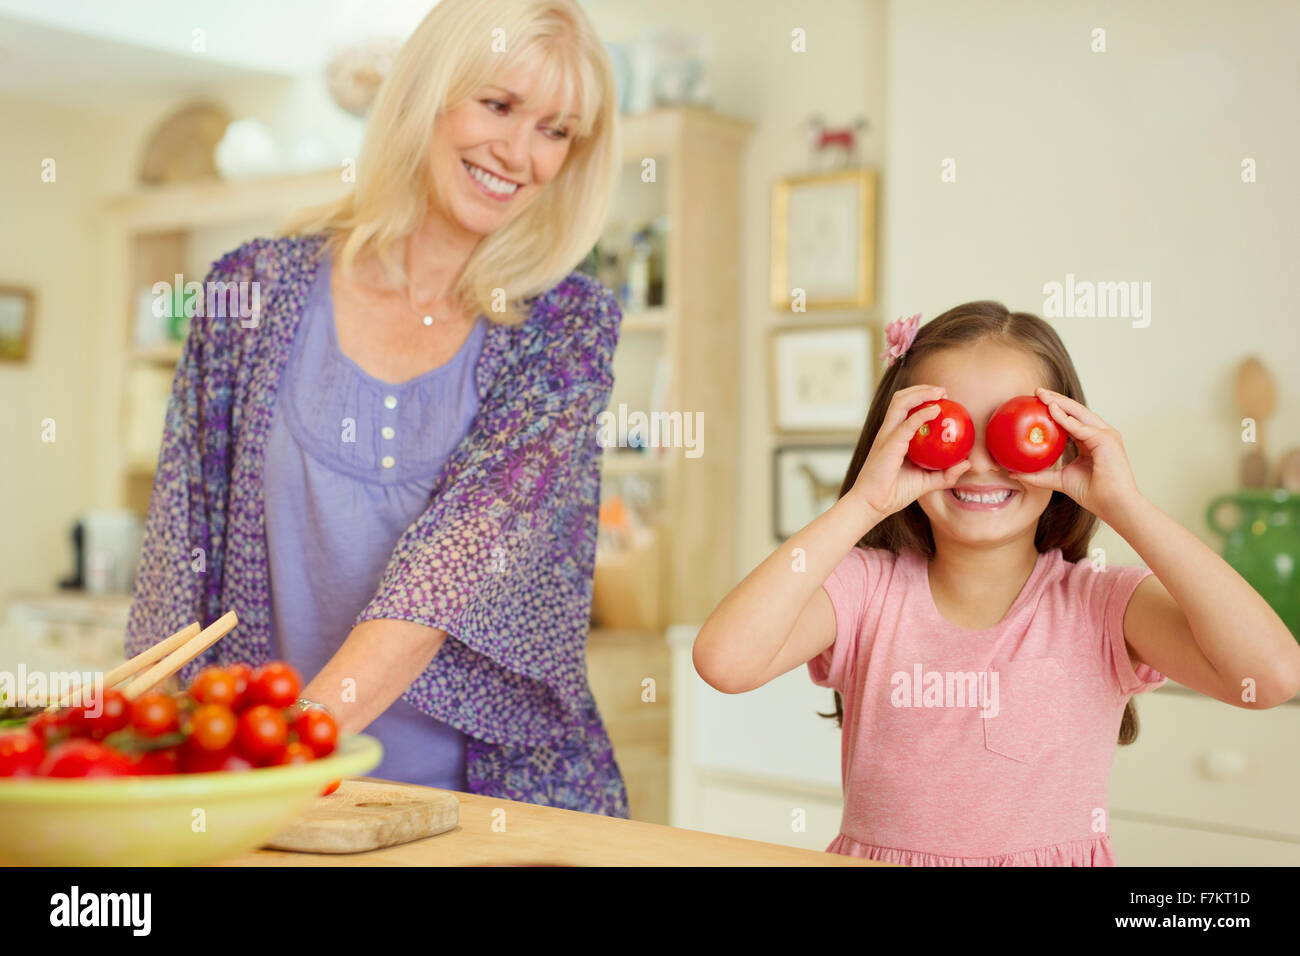 Portrait playful granddaughter covering eyes with tomatoes in kitchen Stock Photo